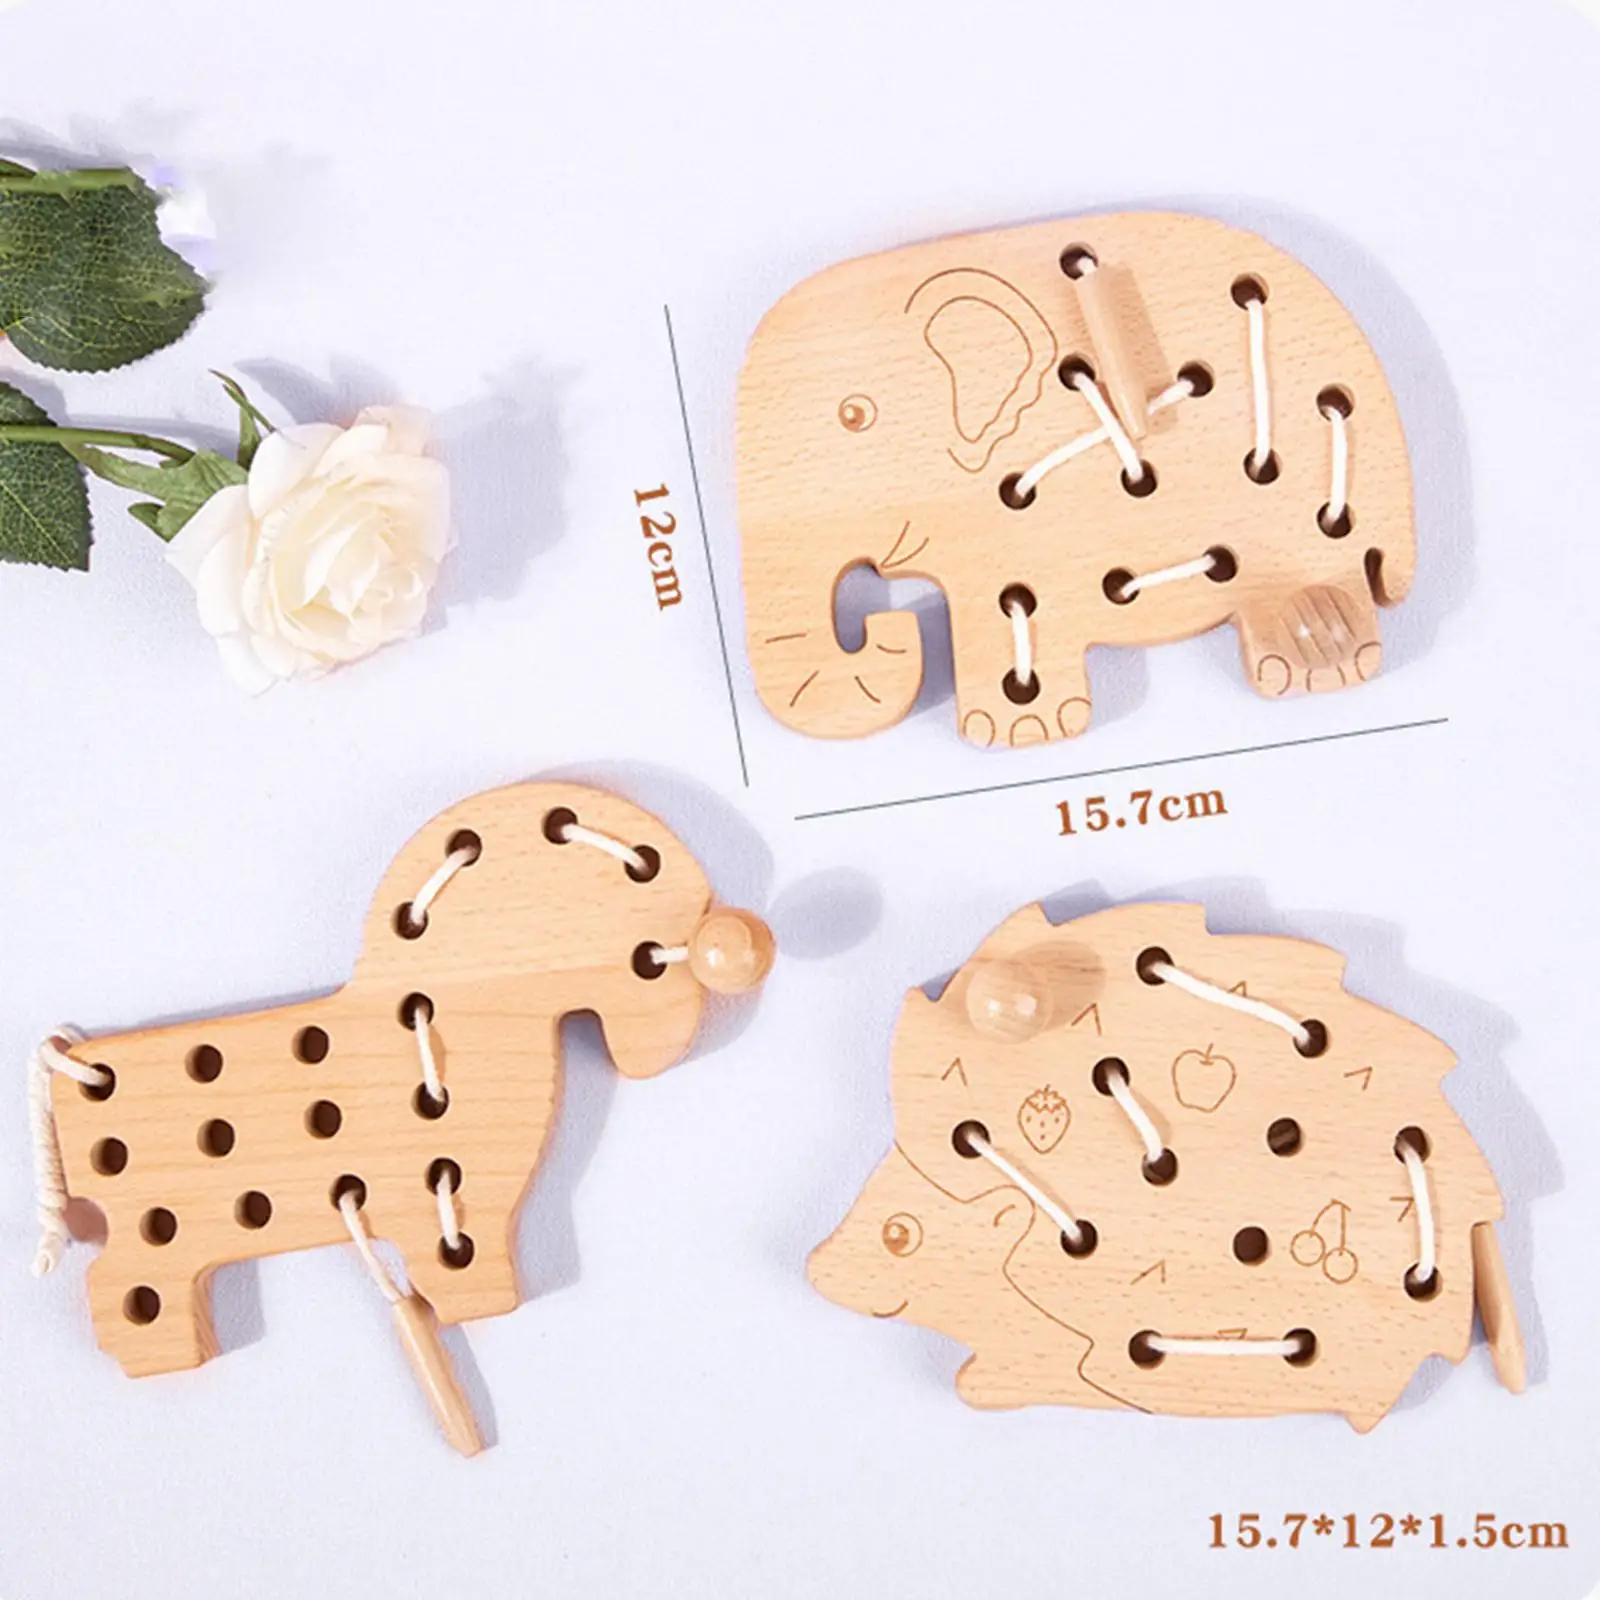 3Pcs Wood Lace Block Puzzle Fine Motor Skills Educational Wooden Lacing Threading for Airplane Toddlers Baby Birthday Gift